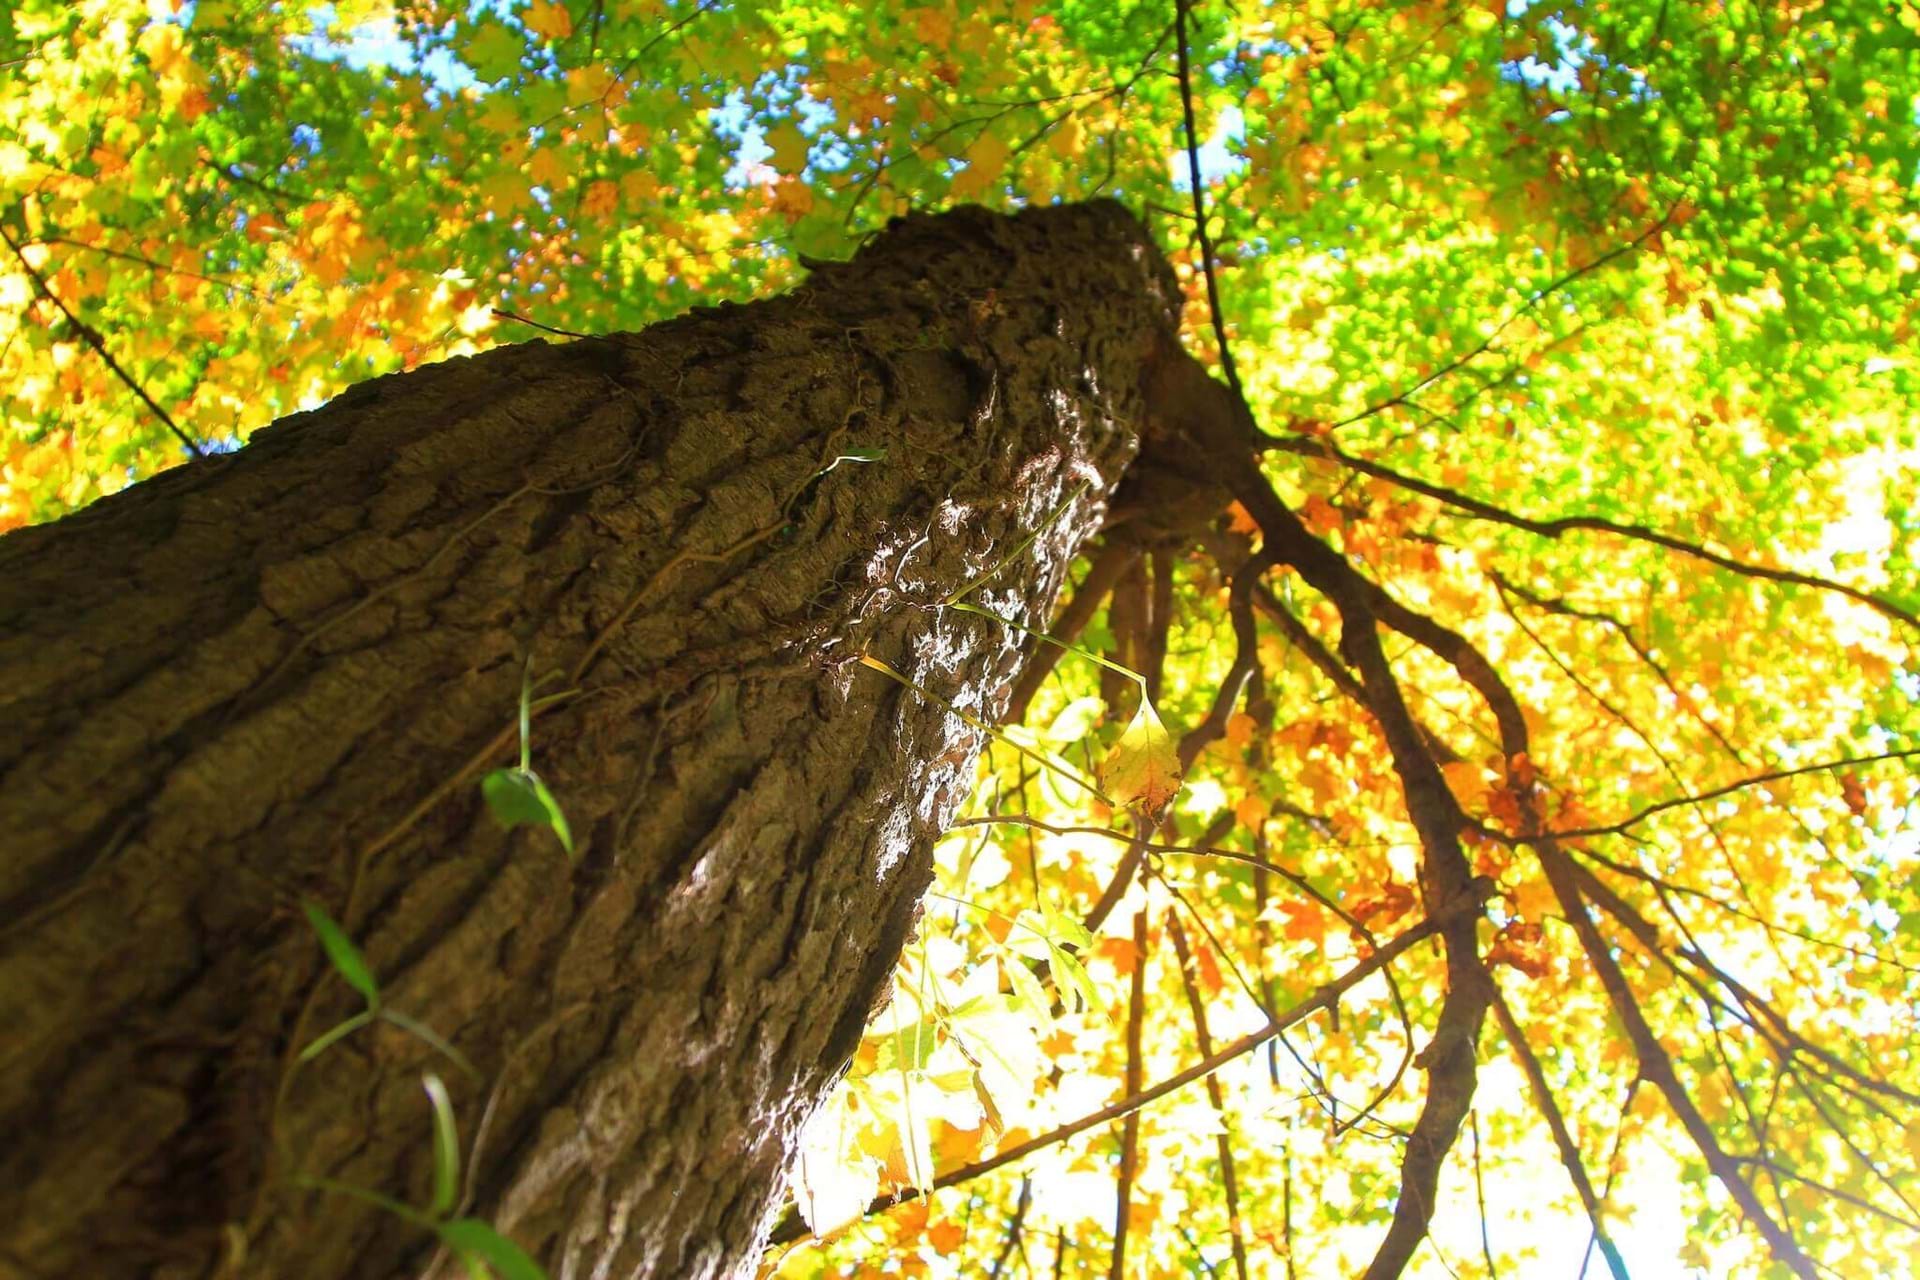 A view of the canopy of a tree from the base of it